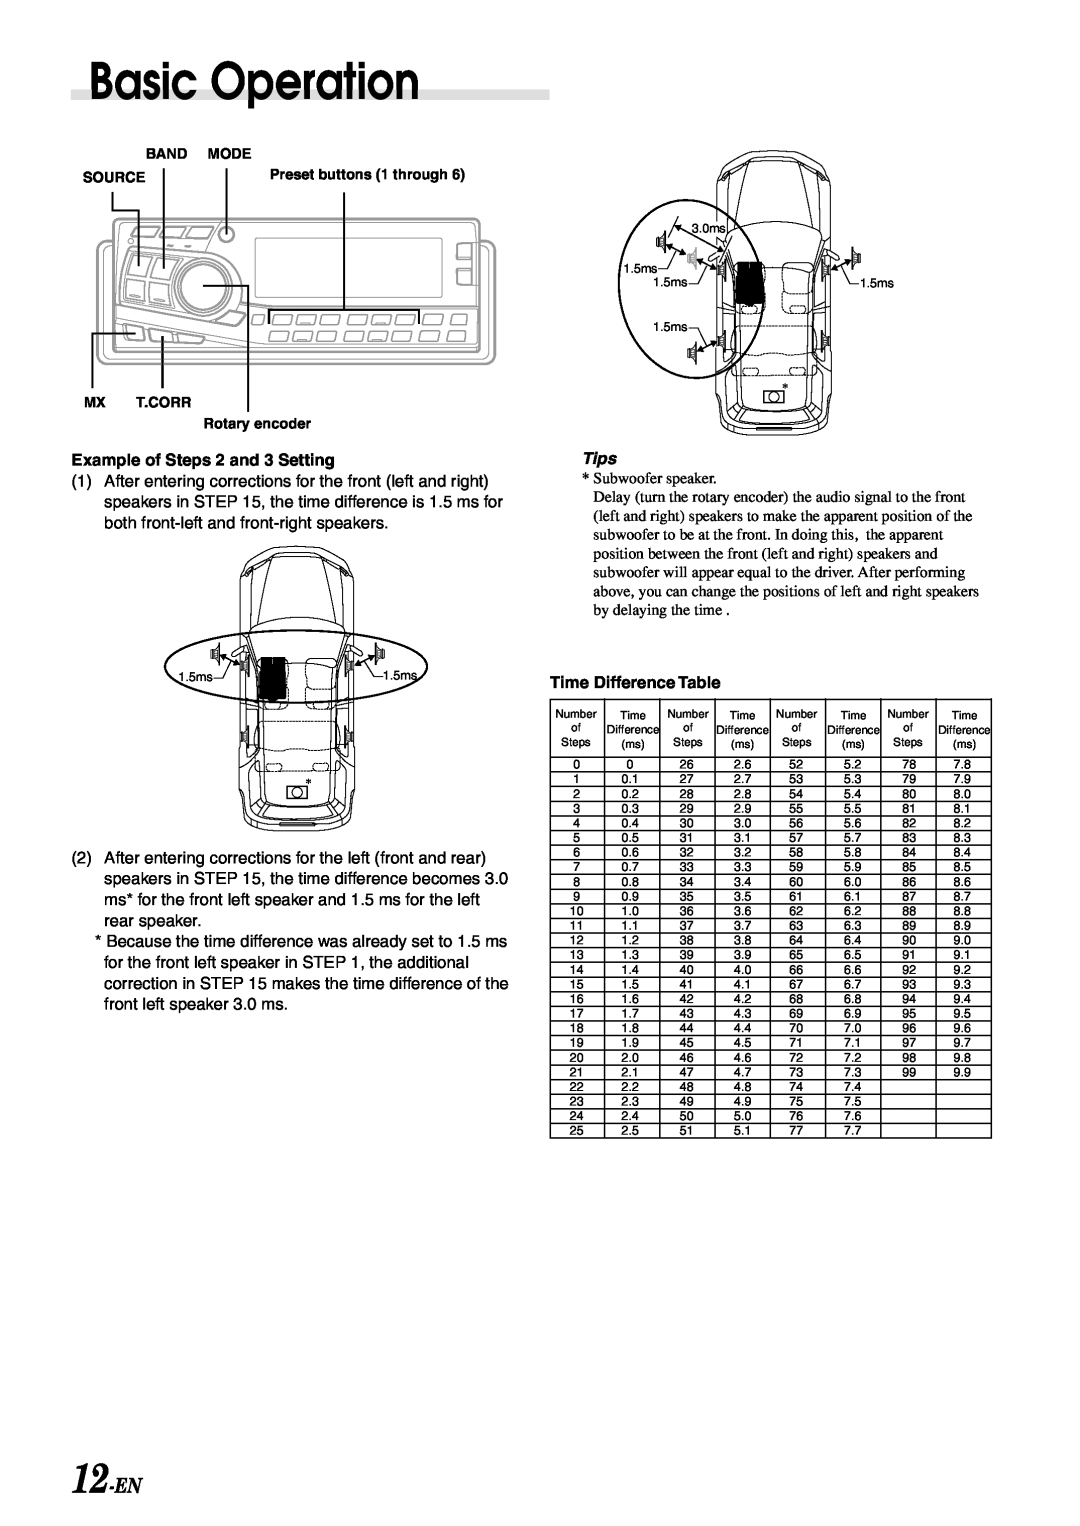 Alpine CDA-7998 owner manual 12-EN, Basic Operation, Example of Steps 2 and 3 Setting, Tips, Time Difference Table 